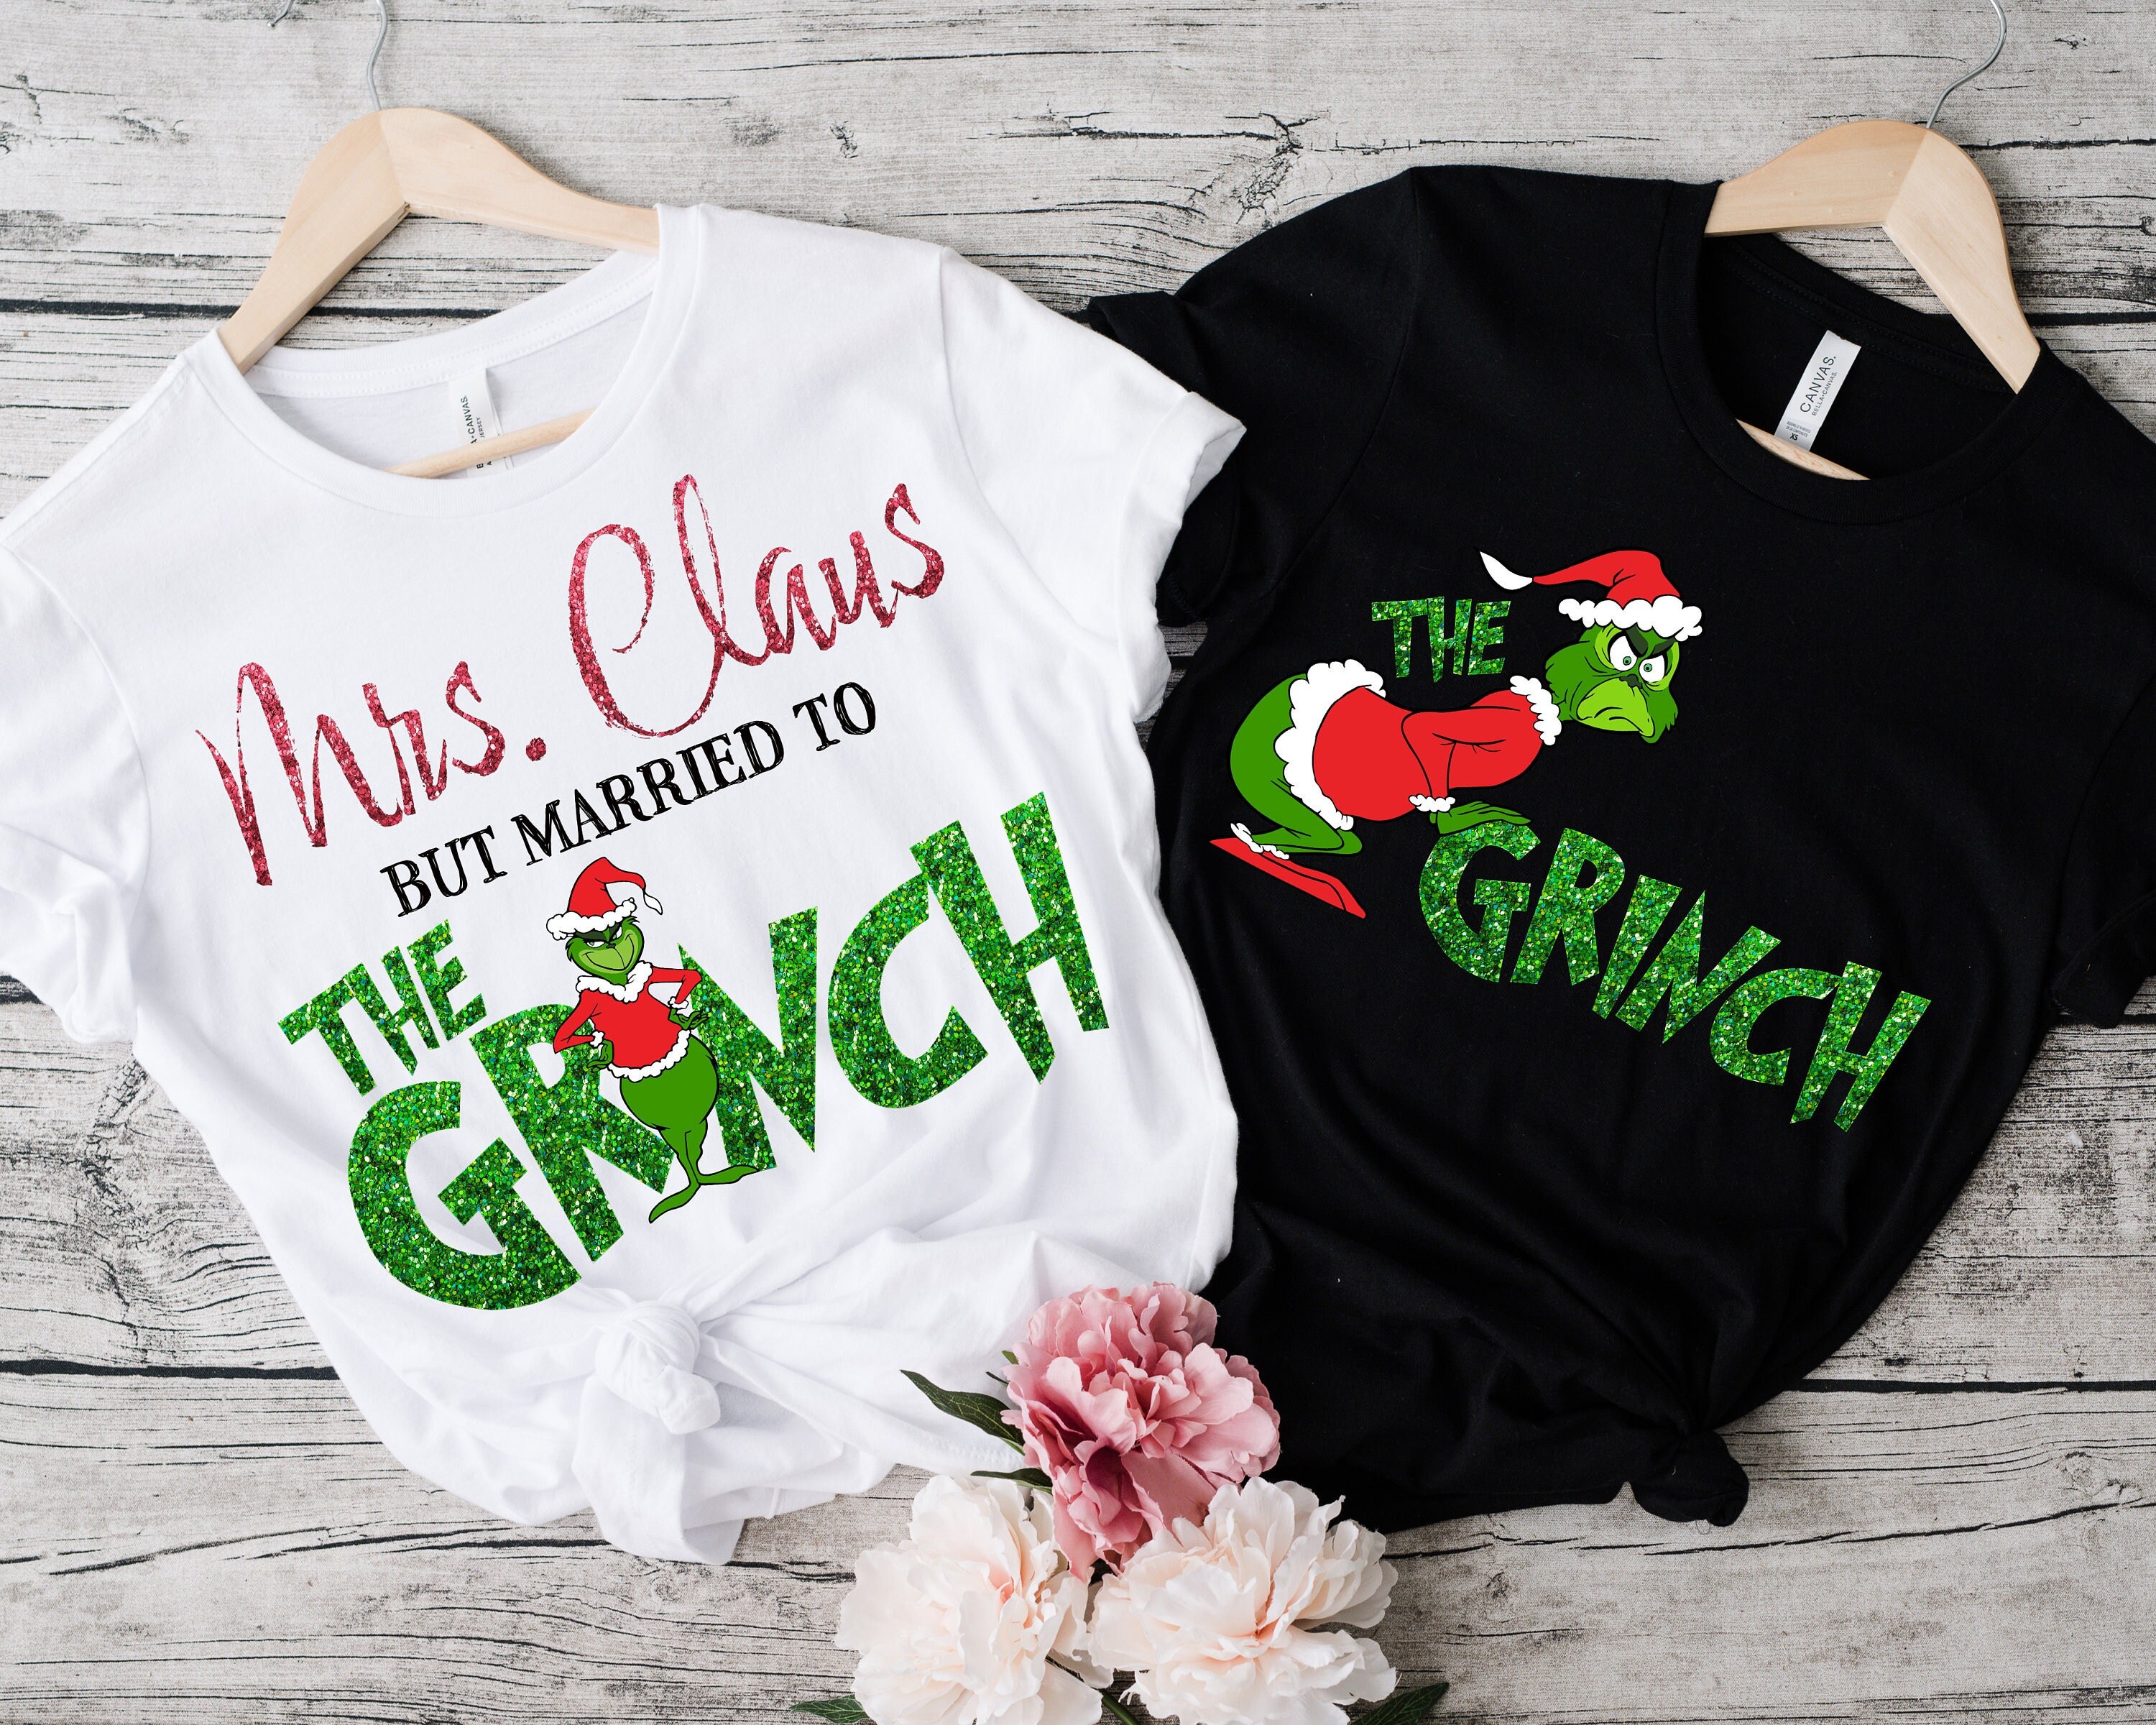 Mrs claus but I married the grinch - 3T Xpressions